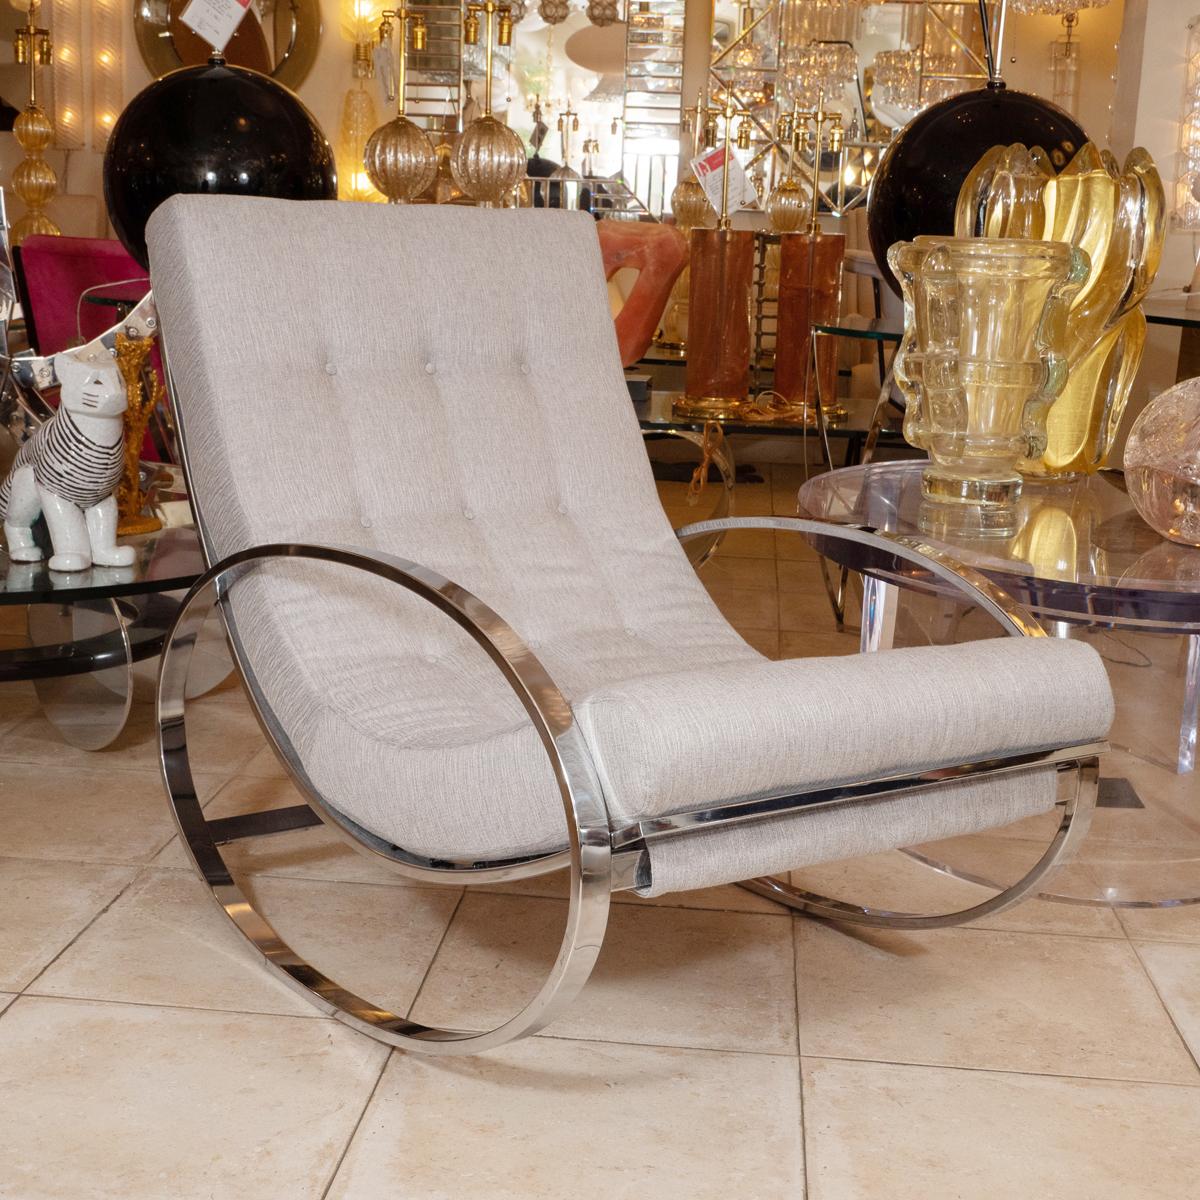 Modern rocking chair and ottoman with chrome details.

Ottoman: 25.5